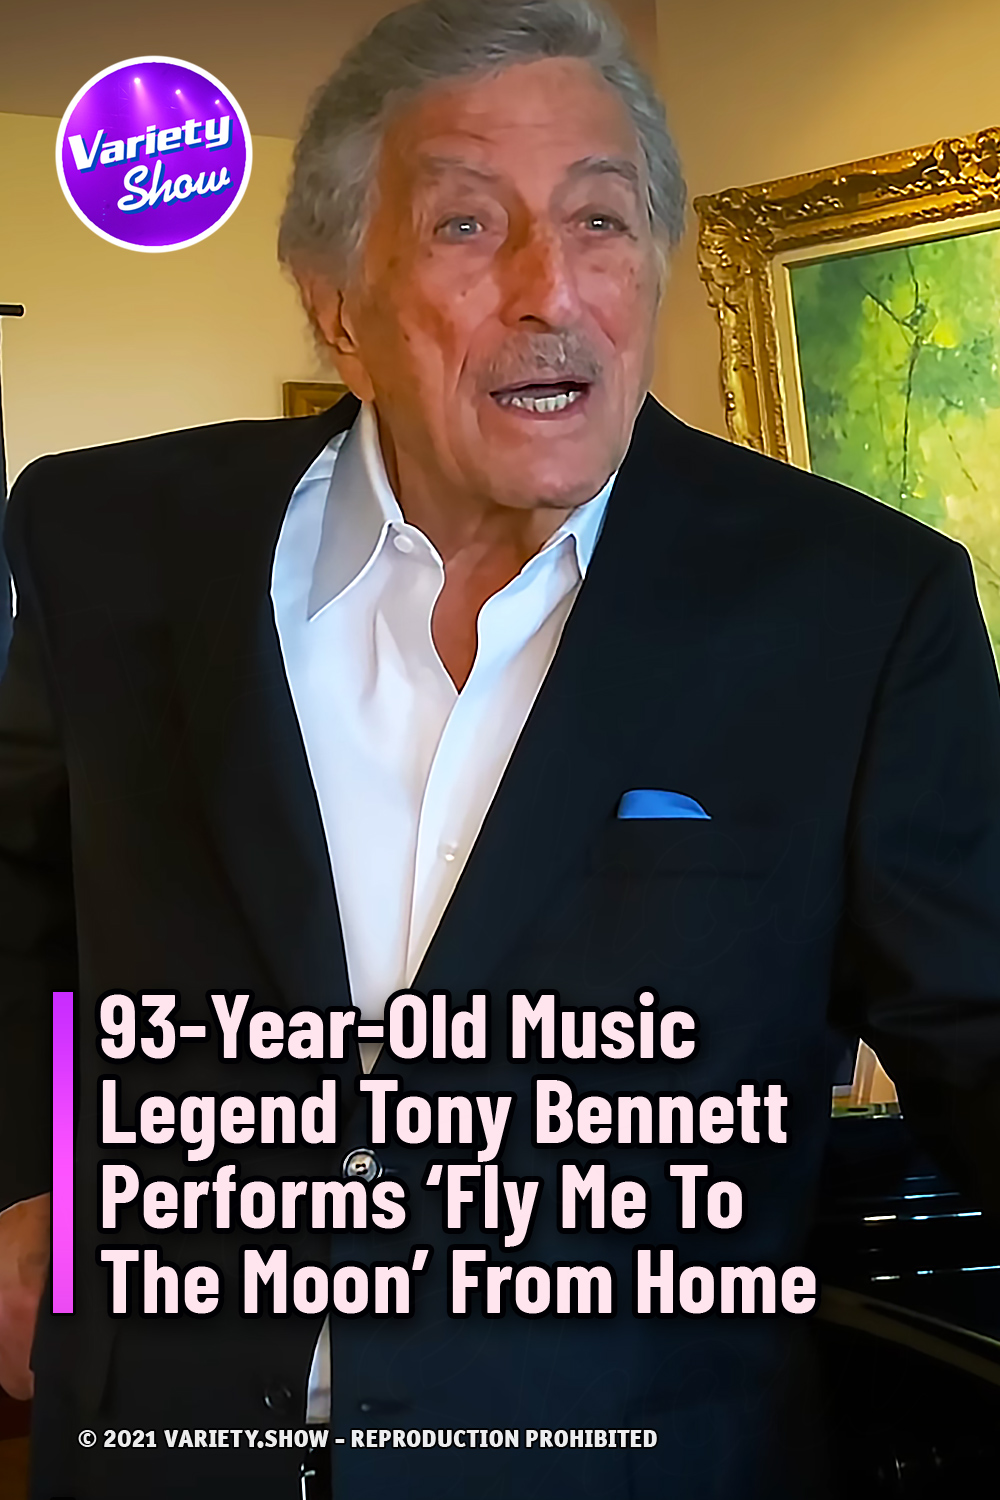 93-Year-Old Music Legend Tony Bennett Performs ‘Fly Me To The Moon’ From Home